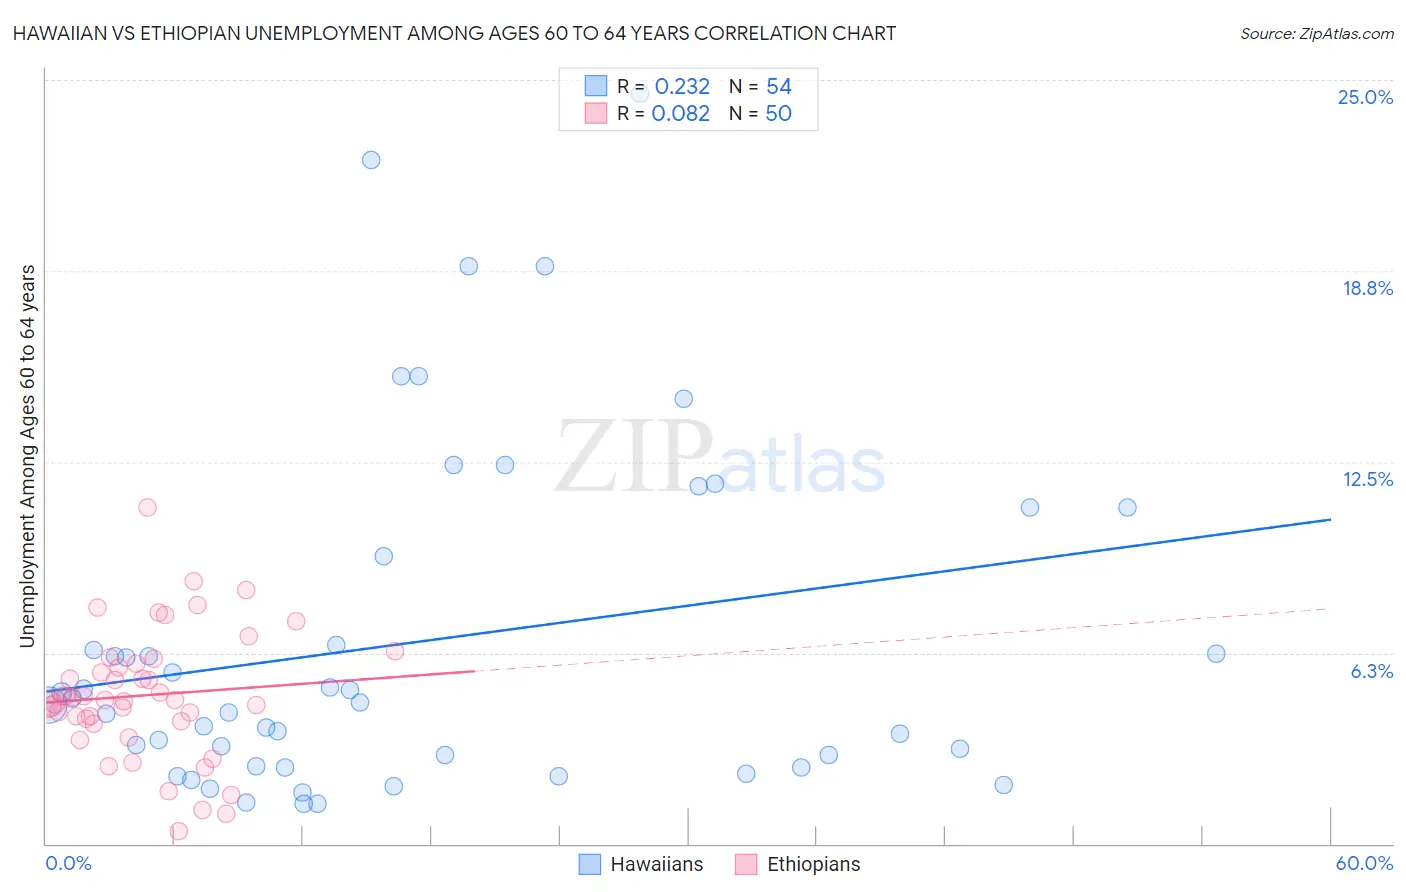 Hawaiian vs Ethiopian Unemployment Among Ages 60 to 64 years